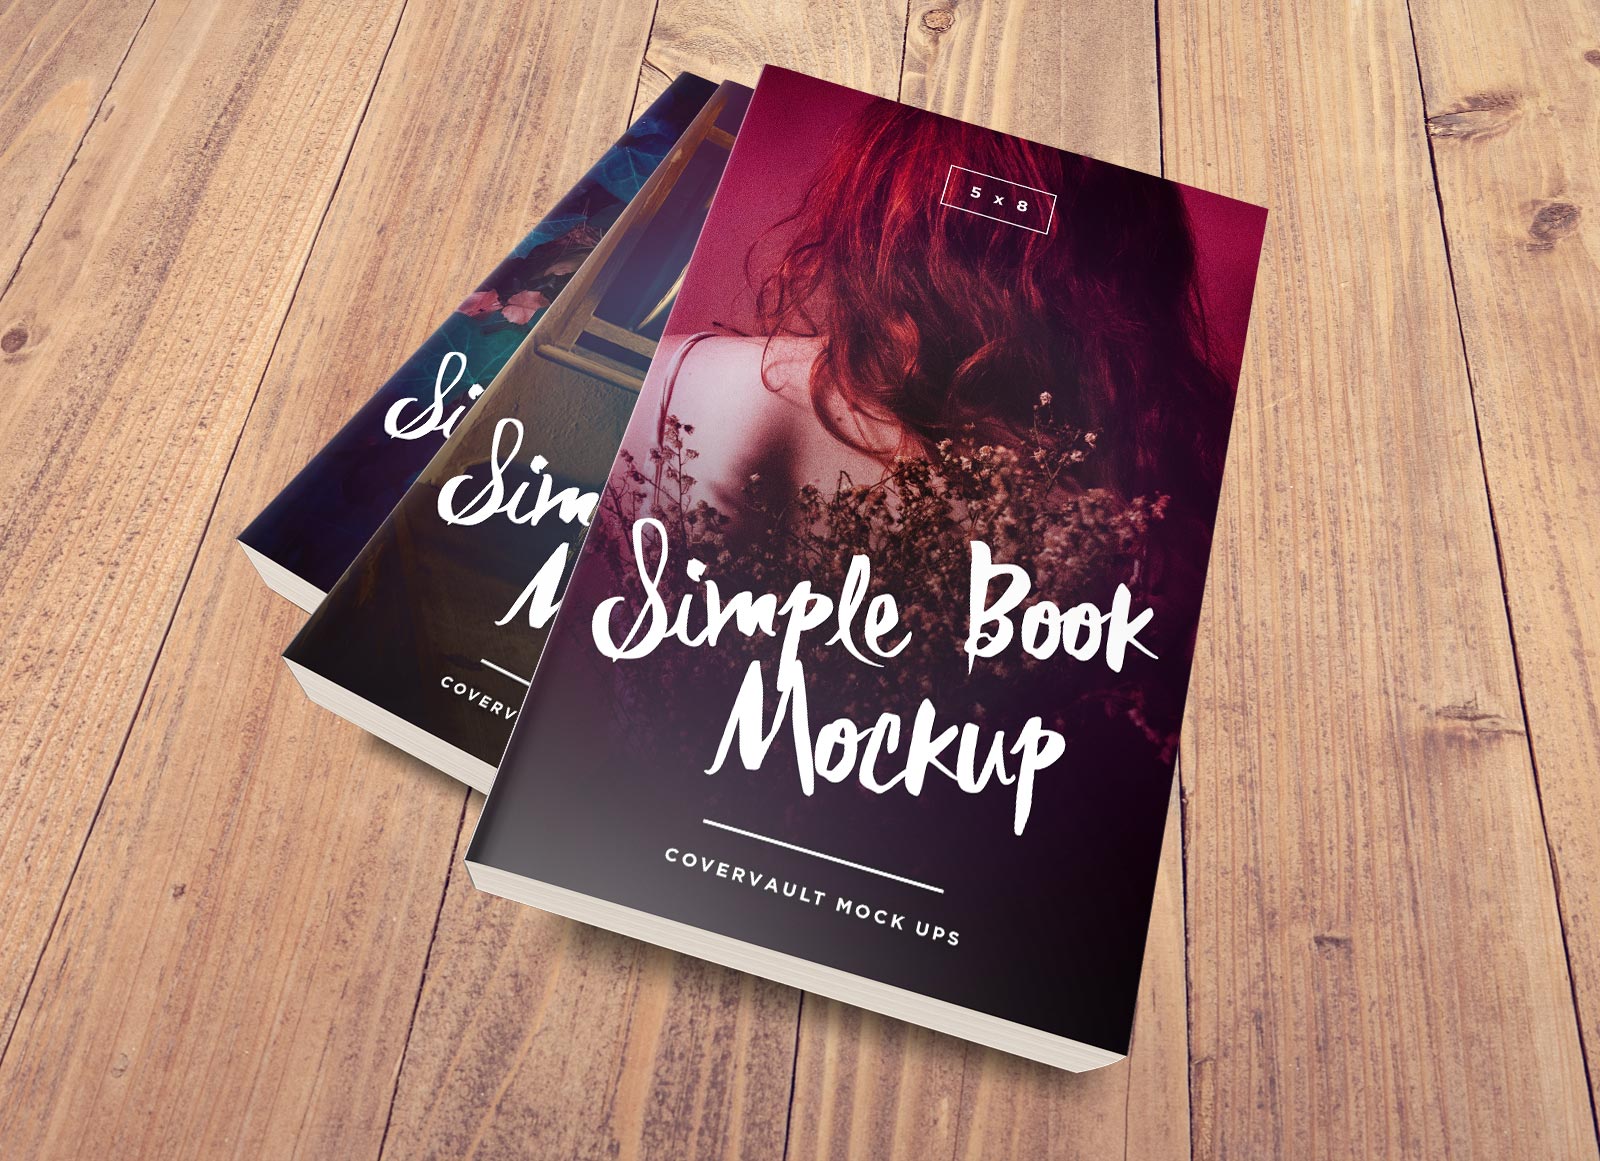 Free-Paperback-Stacked-3-Book-Series-Mockup-PSD